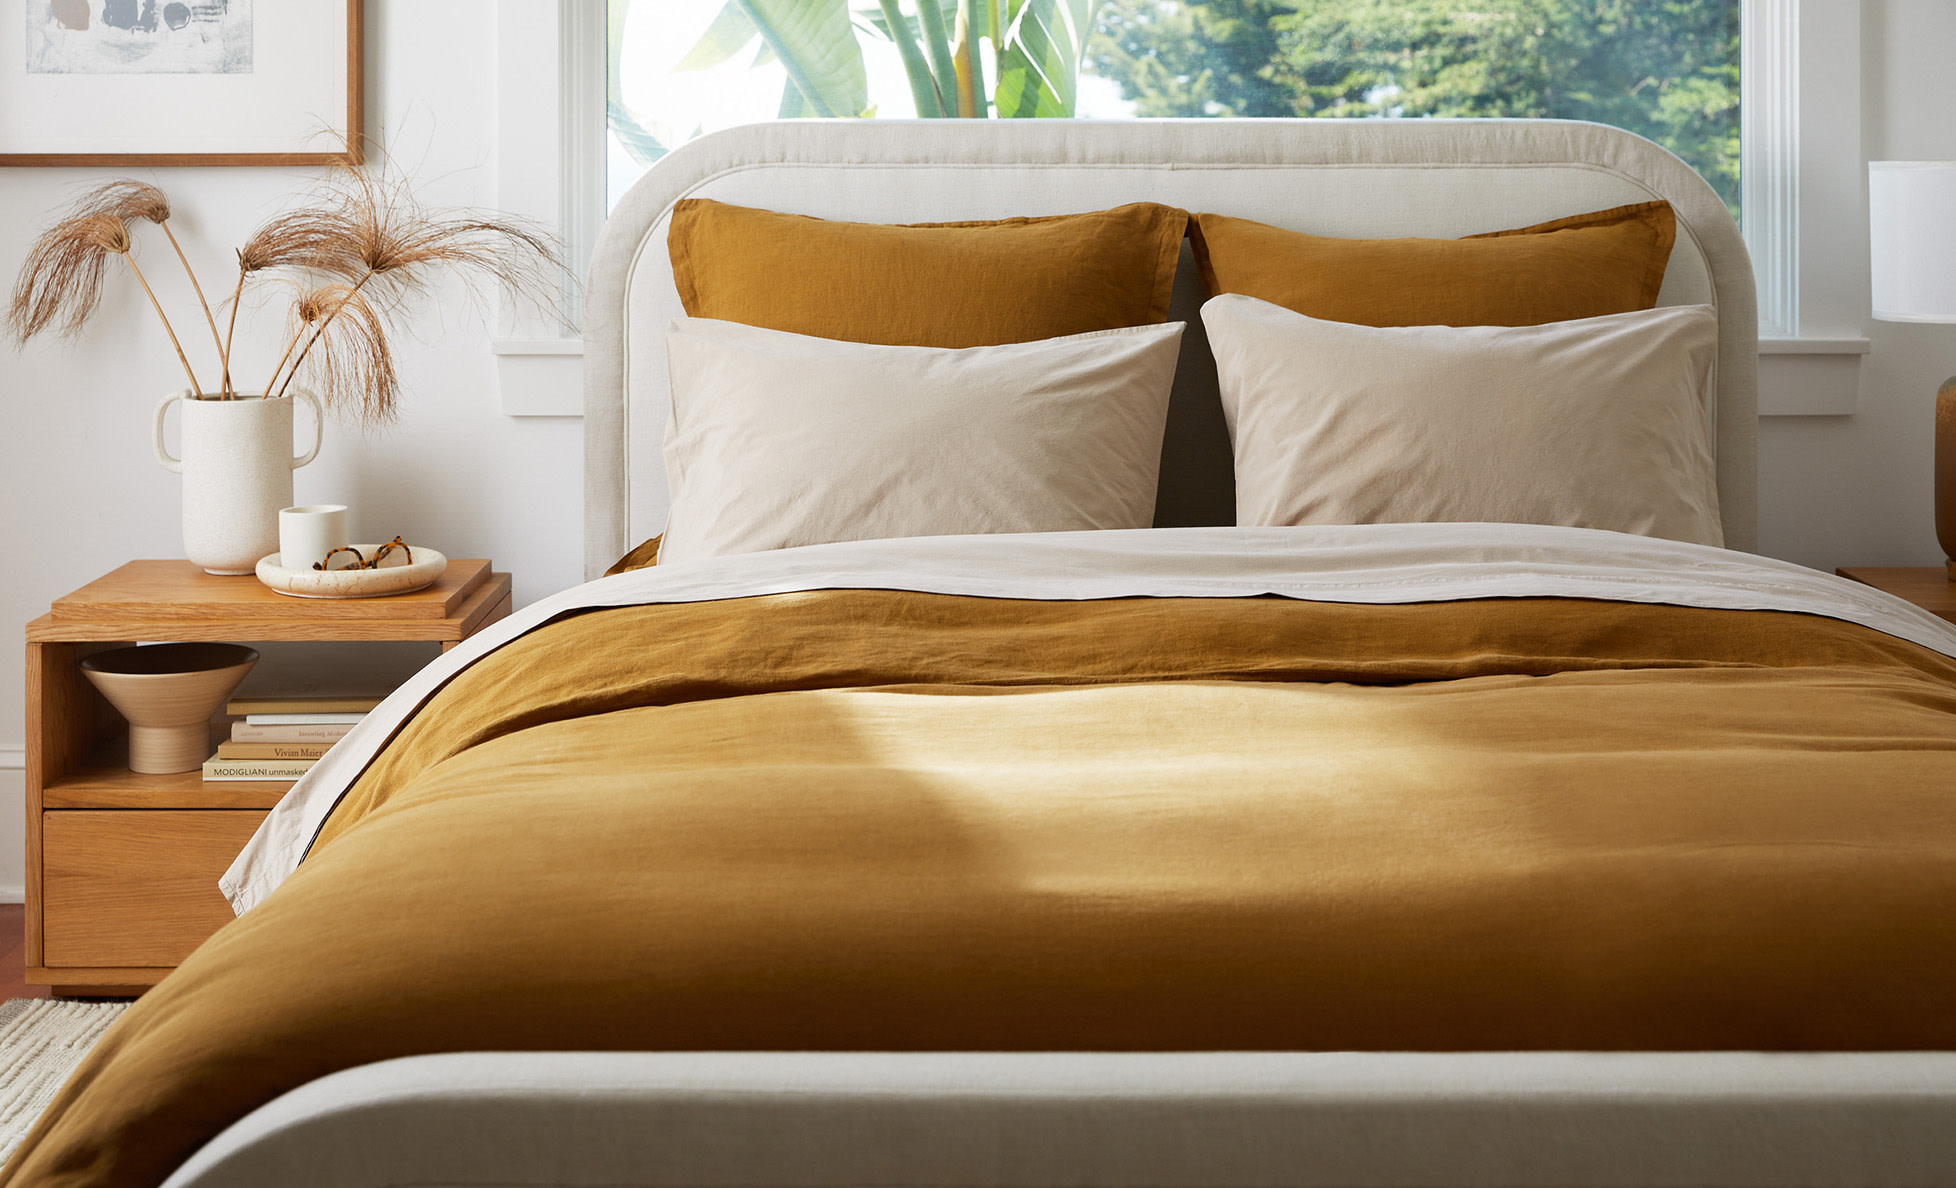 A neat bed with ochre linen and latte brushed cotton sheets